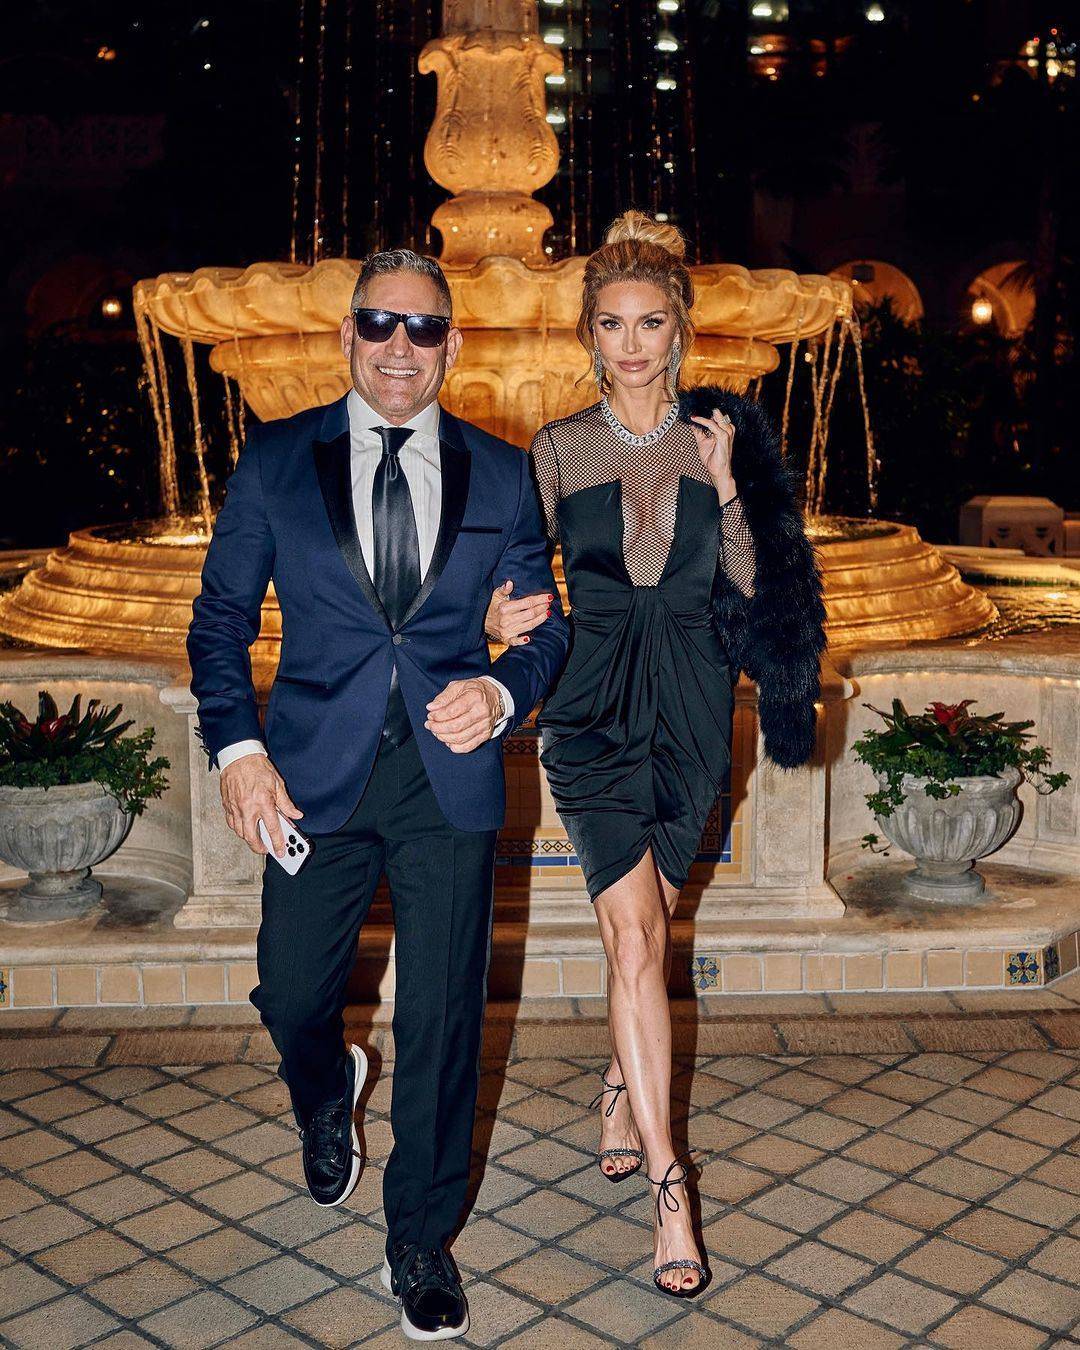 Wealthy Maga fan Elena Cardone – the wife of entrepreneur, property mogul and financial influencer Grant Cardone (both pictured) – has caused controversy by raising money on GoFundMe to help pay the US$454 million Donald Trump owes in fines and interest, having been convicted of financial fraud. Photo: @elenacardone/Instagram